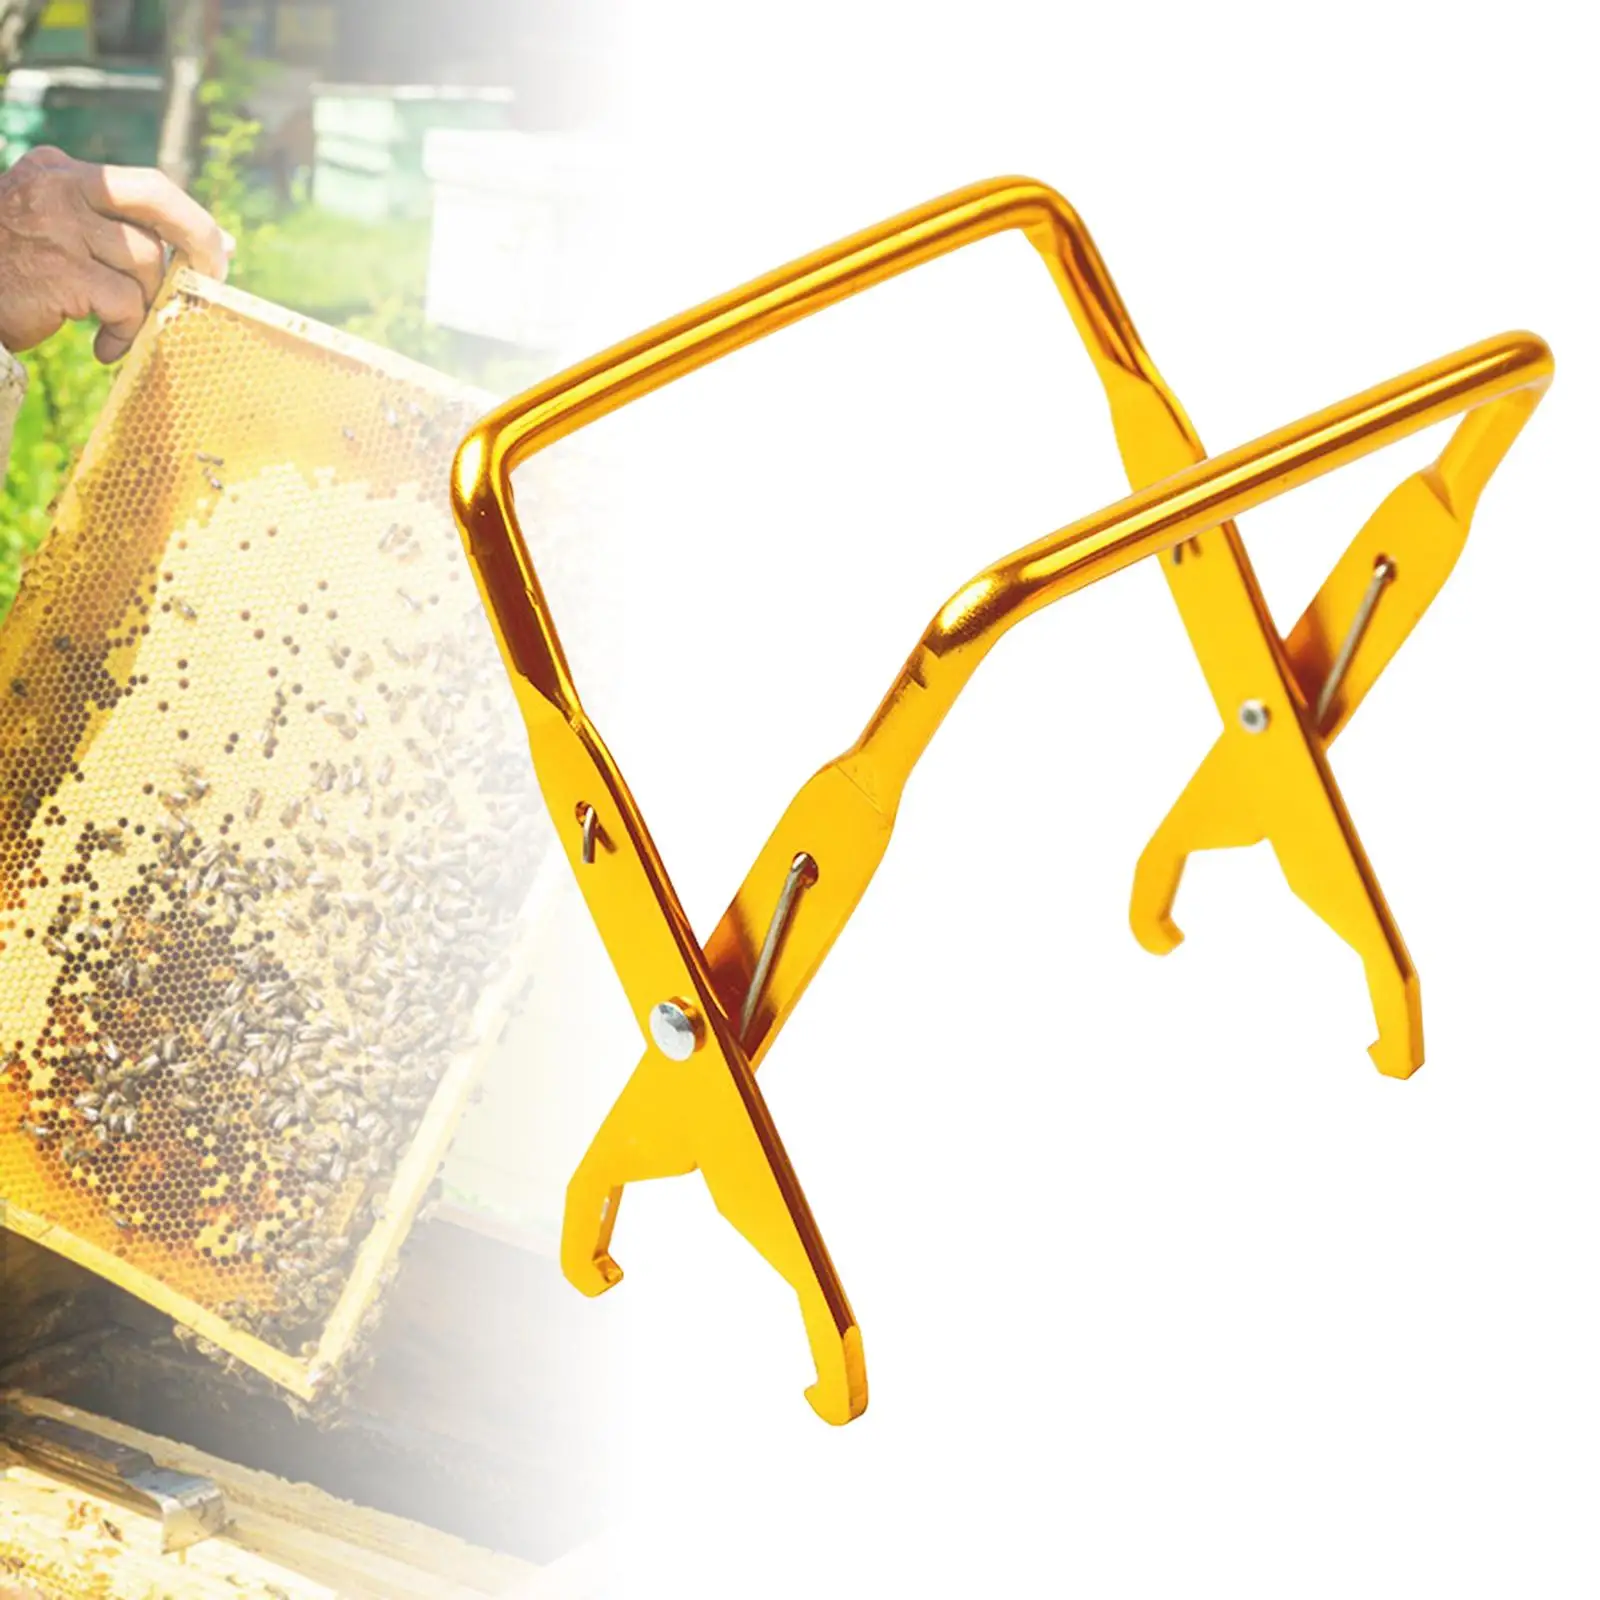 Beehive Frame Grip Stainless Steel Professional Durable Gripper Beehive Grip High Performance Supporting Beekeeping Tool